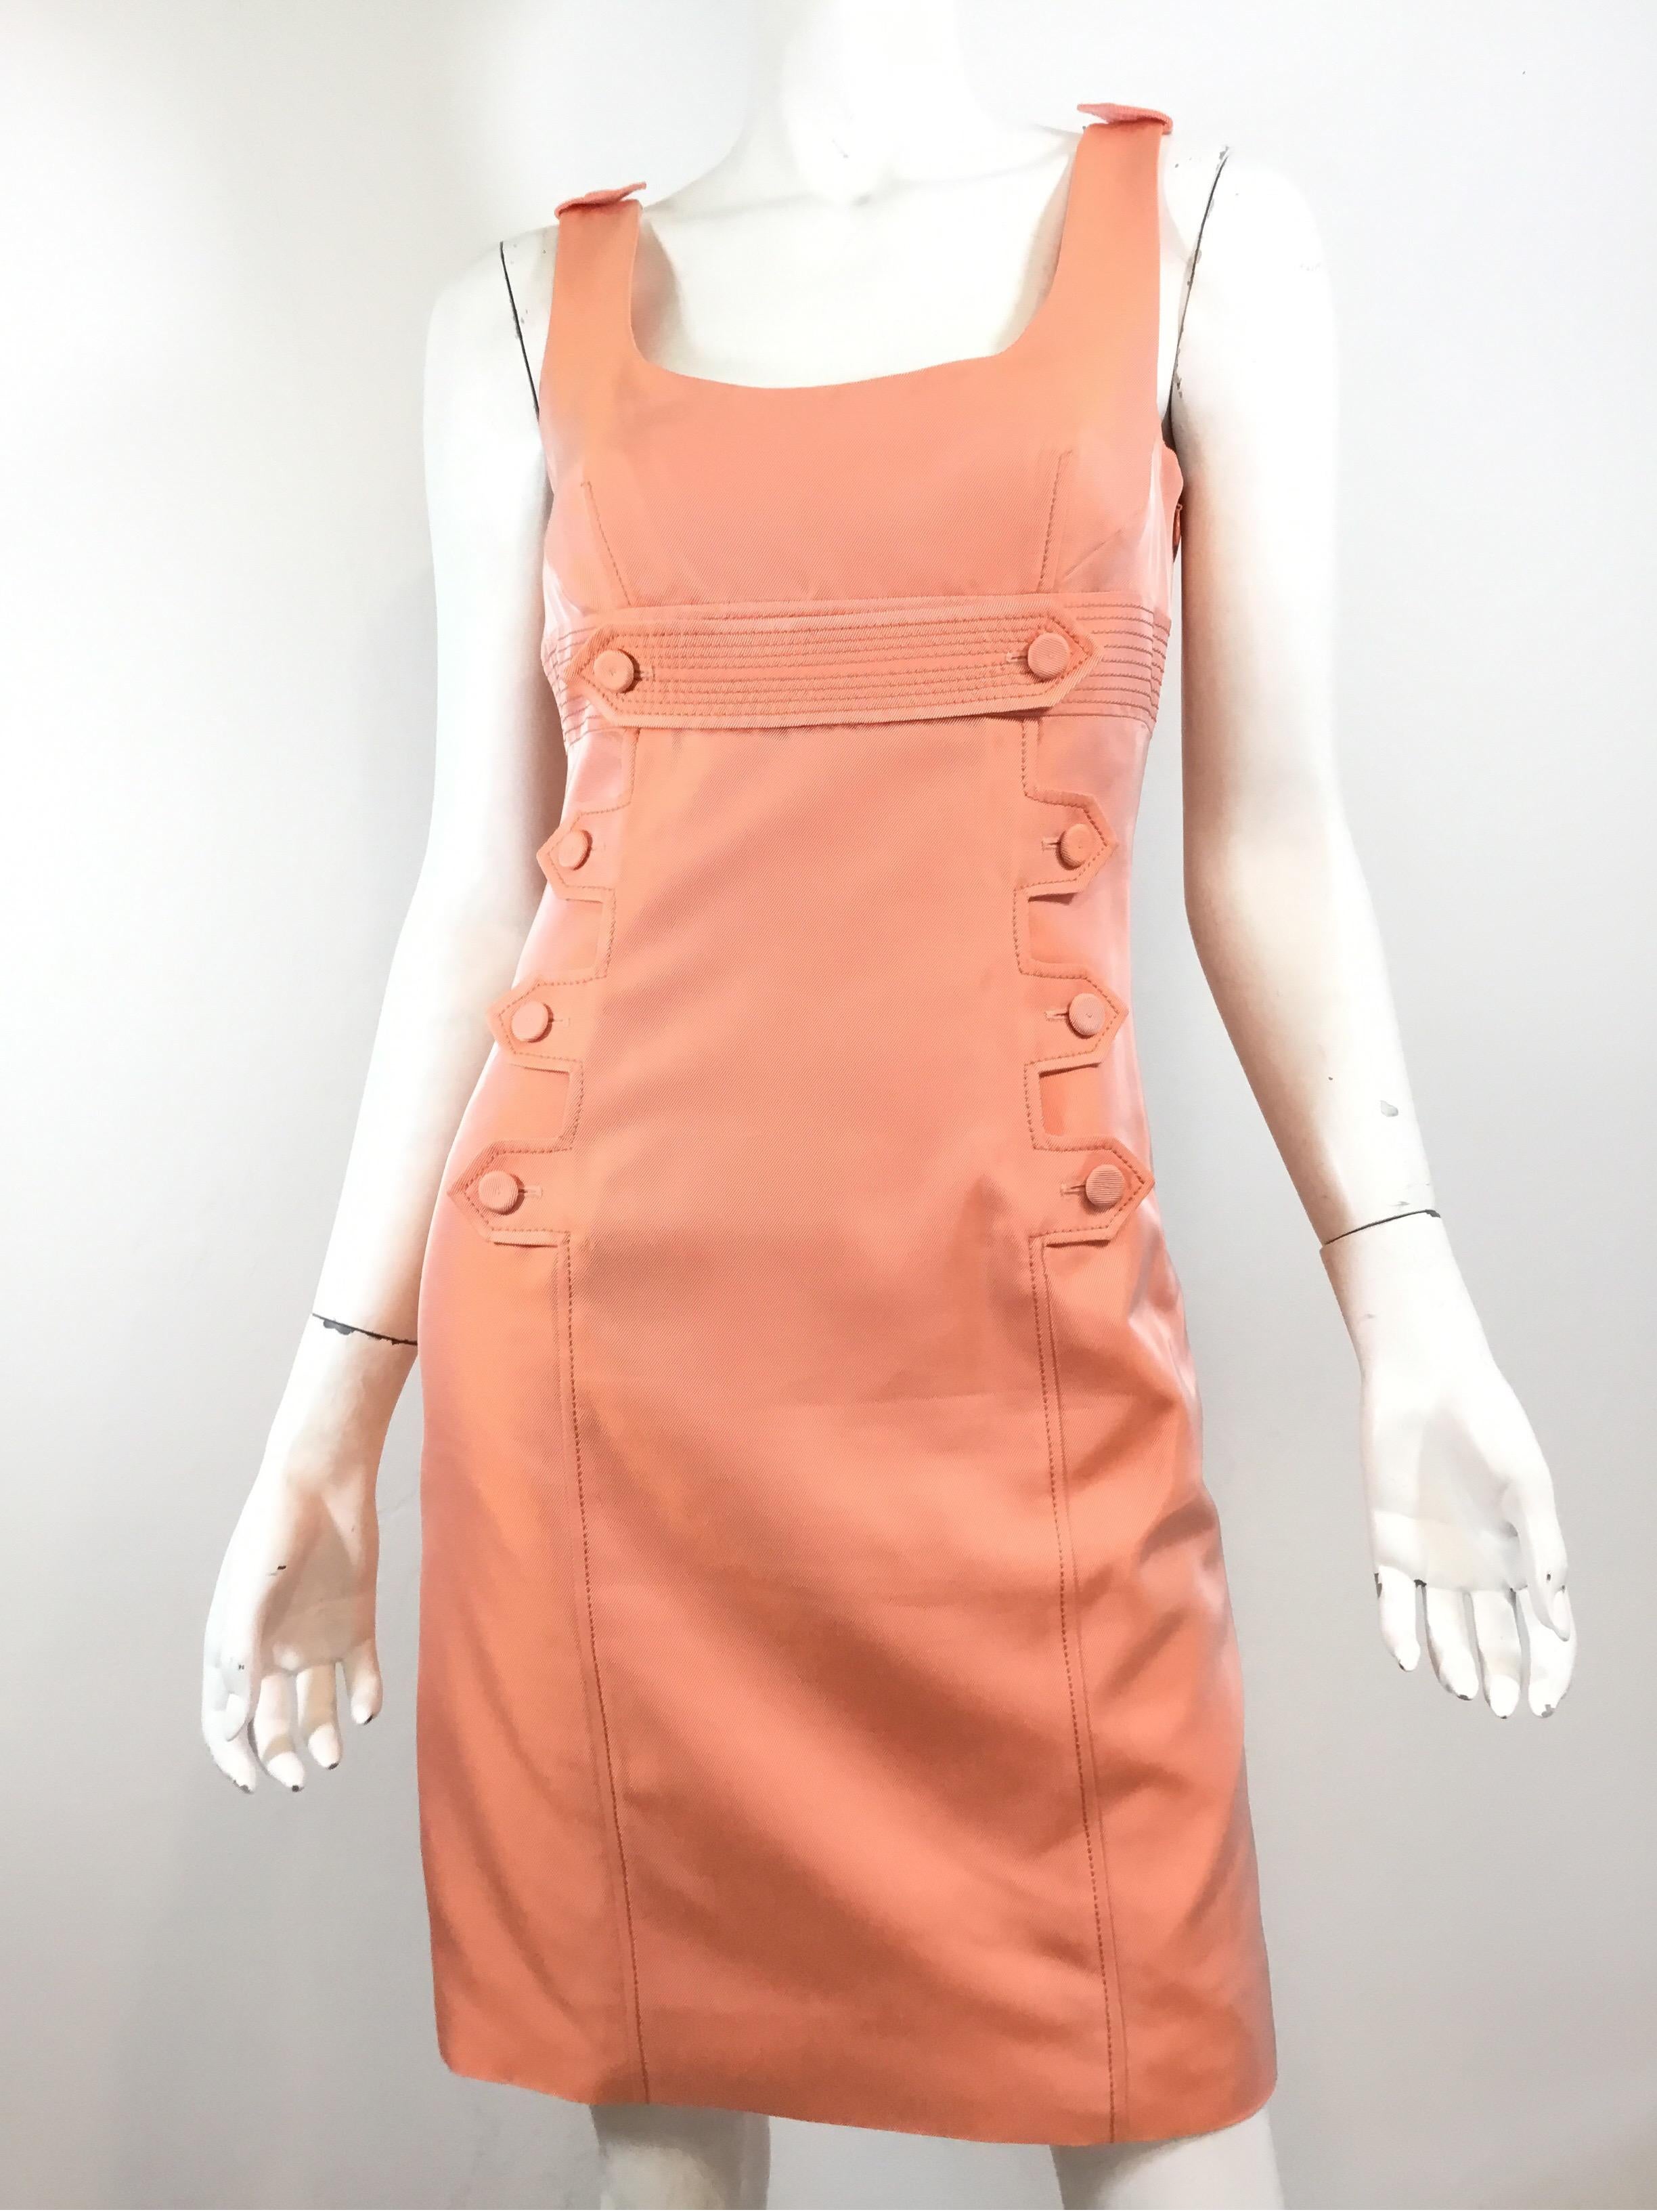 Givenchy Dress featured in a Coral/peach color with decorative buttons along the front. Dress has a side zipper fastening and full lining. Size 38, made in France. 

Bust 33”, waist 30”, hips 34”, length 32”